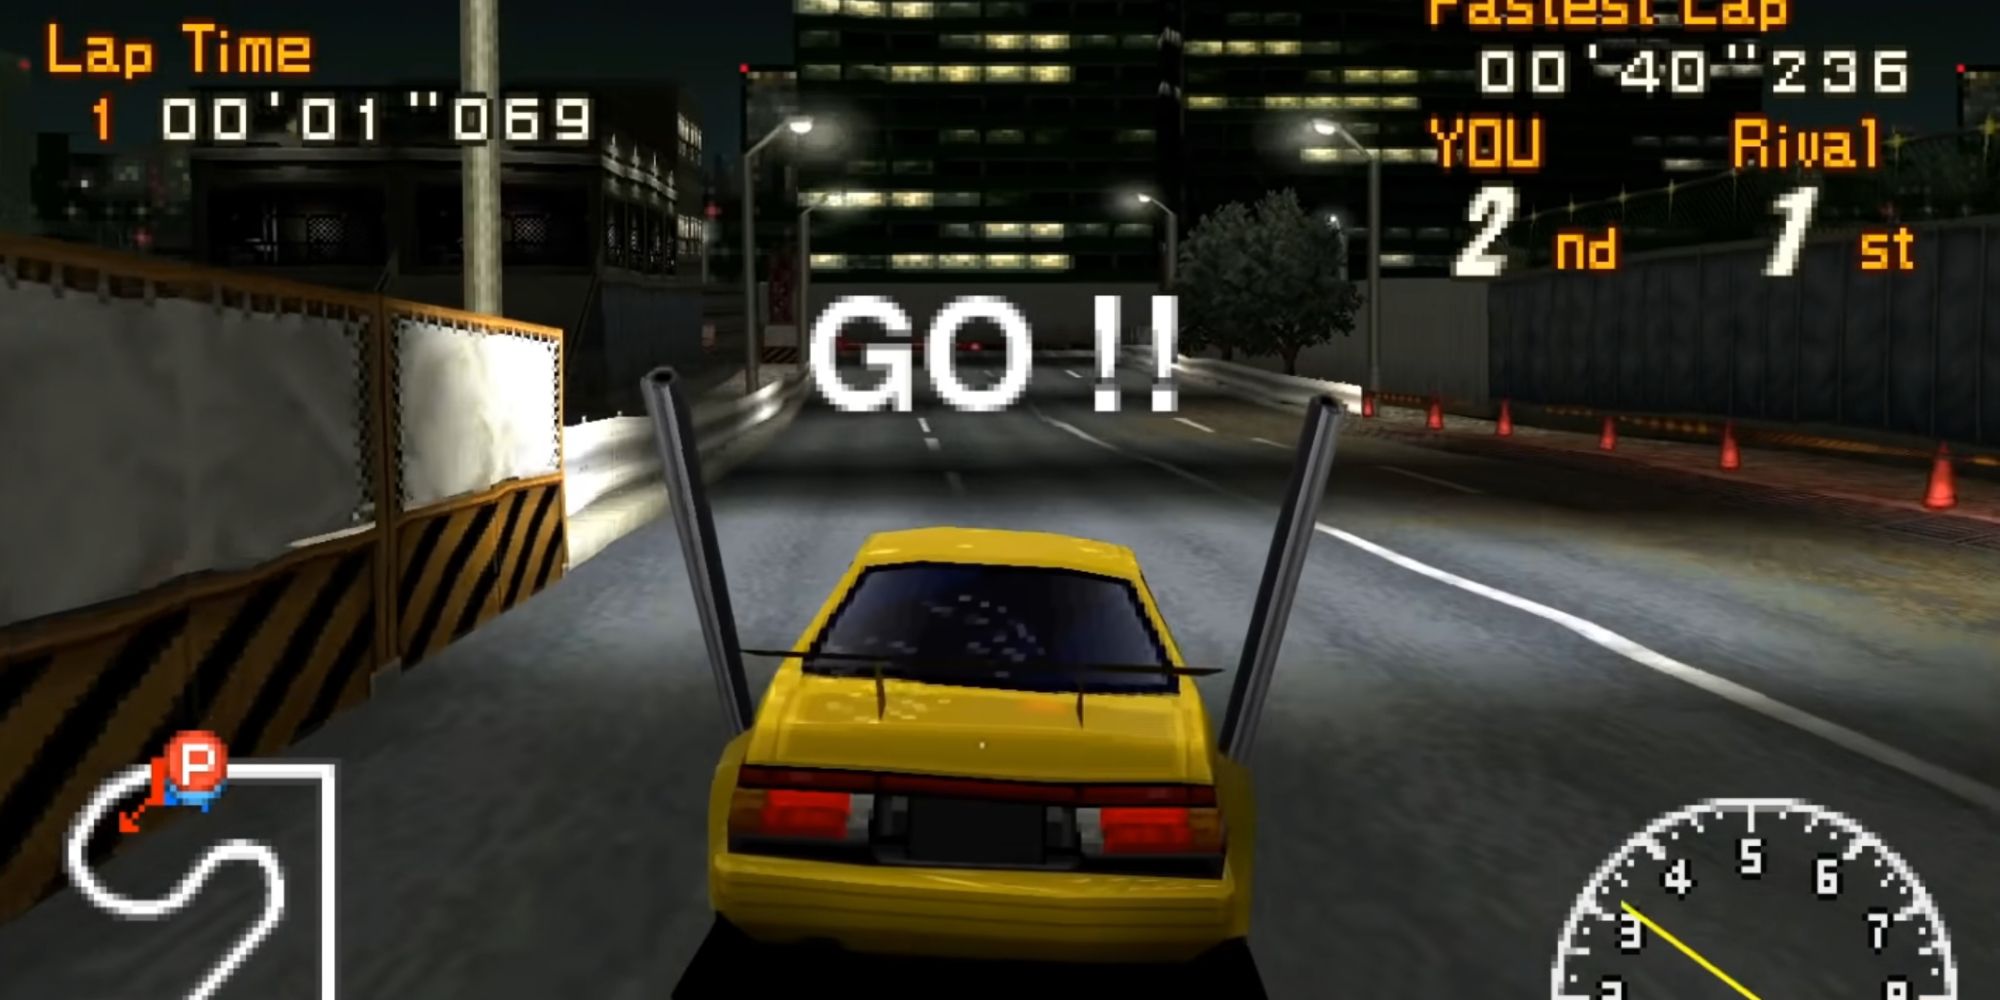 A screenshot from Racing Lagoon, showing a modified car racing from the starting line at night